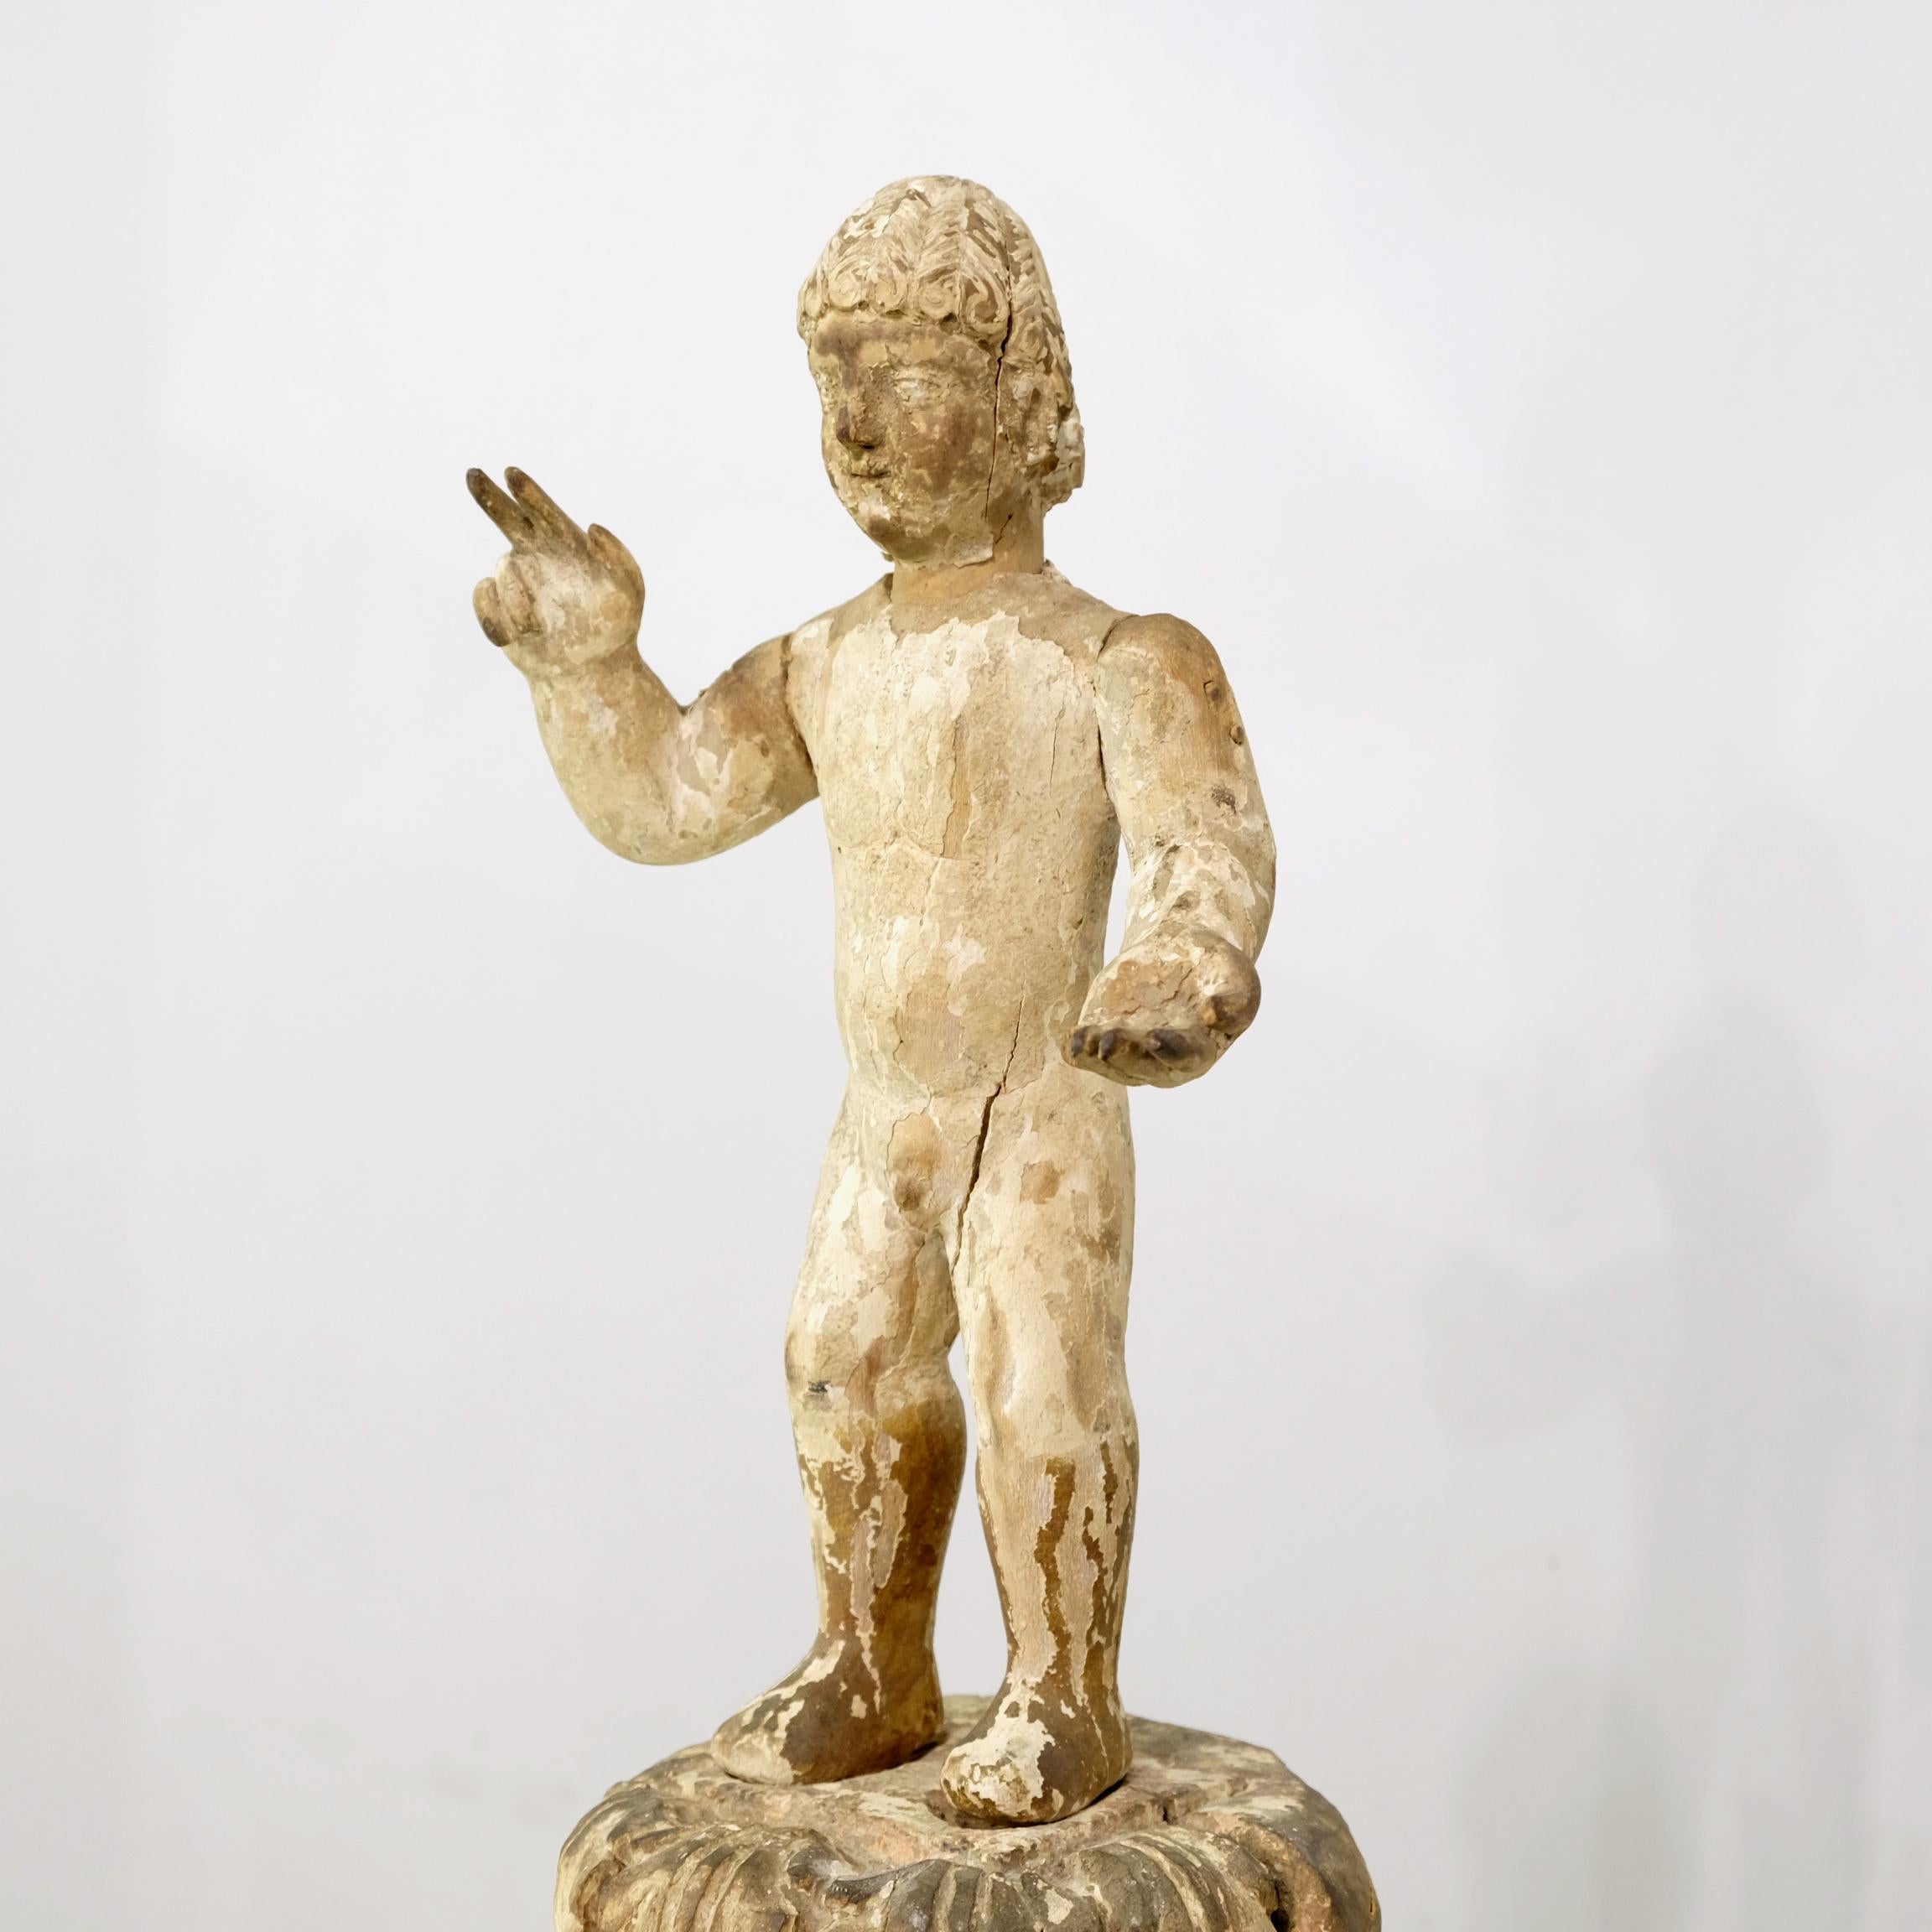 Hispanic Santo Niño or Christ Child dating from the late 17th to early 18th Century, hand-carved in pine and exhibiting its characterful original gesso with traces of original polychrome paint. Holding his right hand to offer a blessing, his left